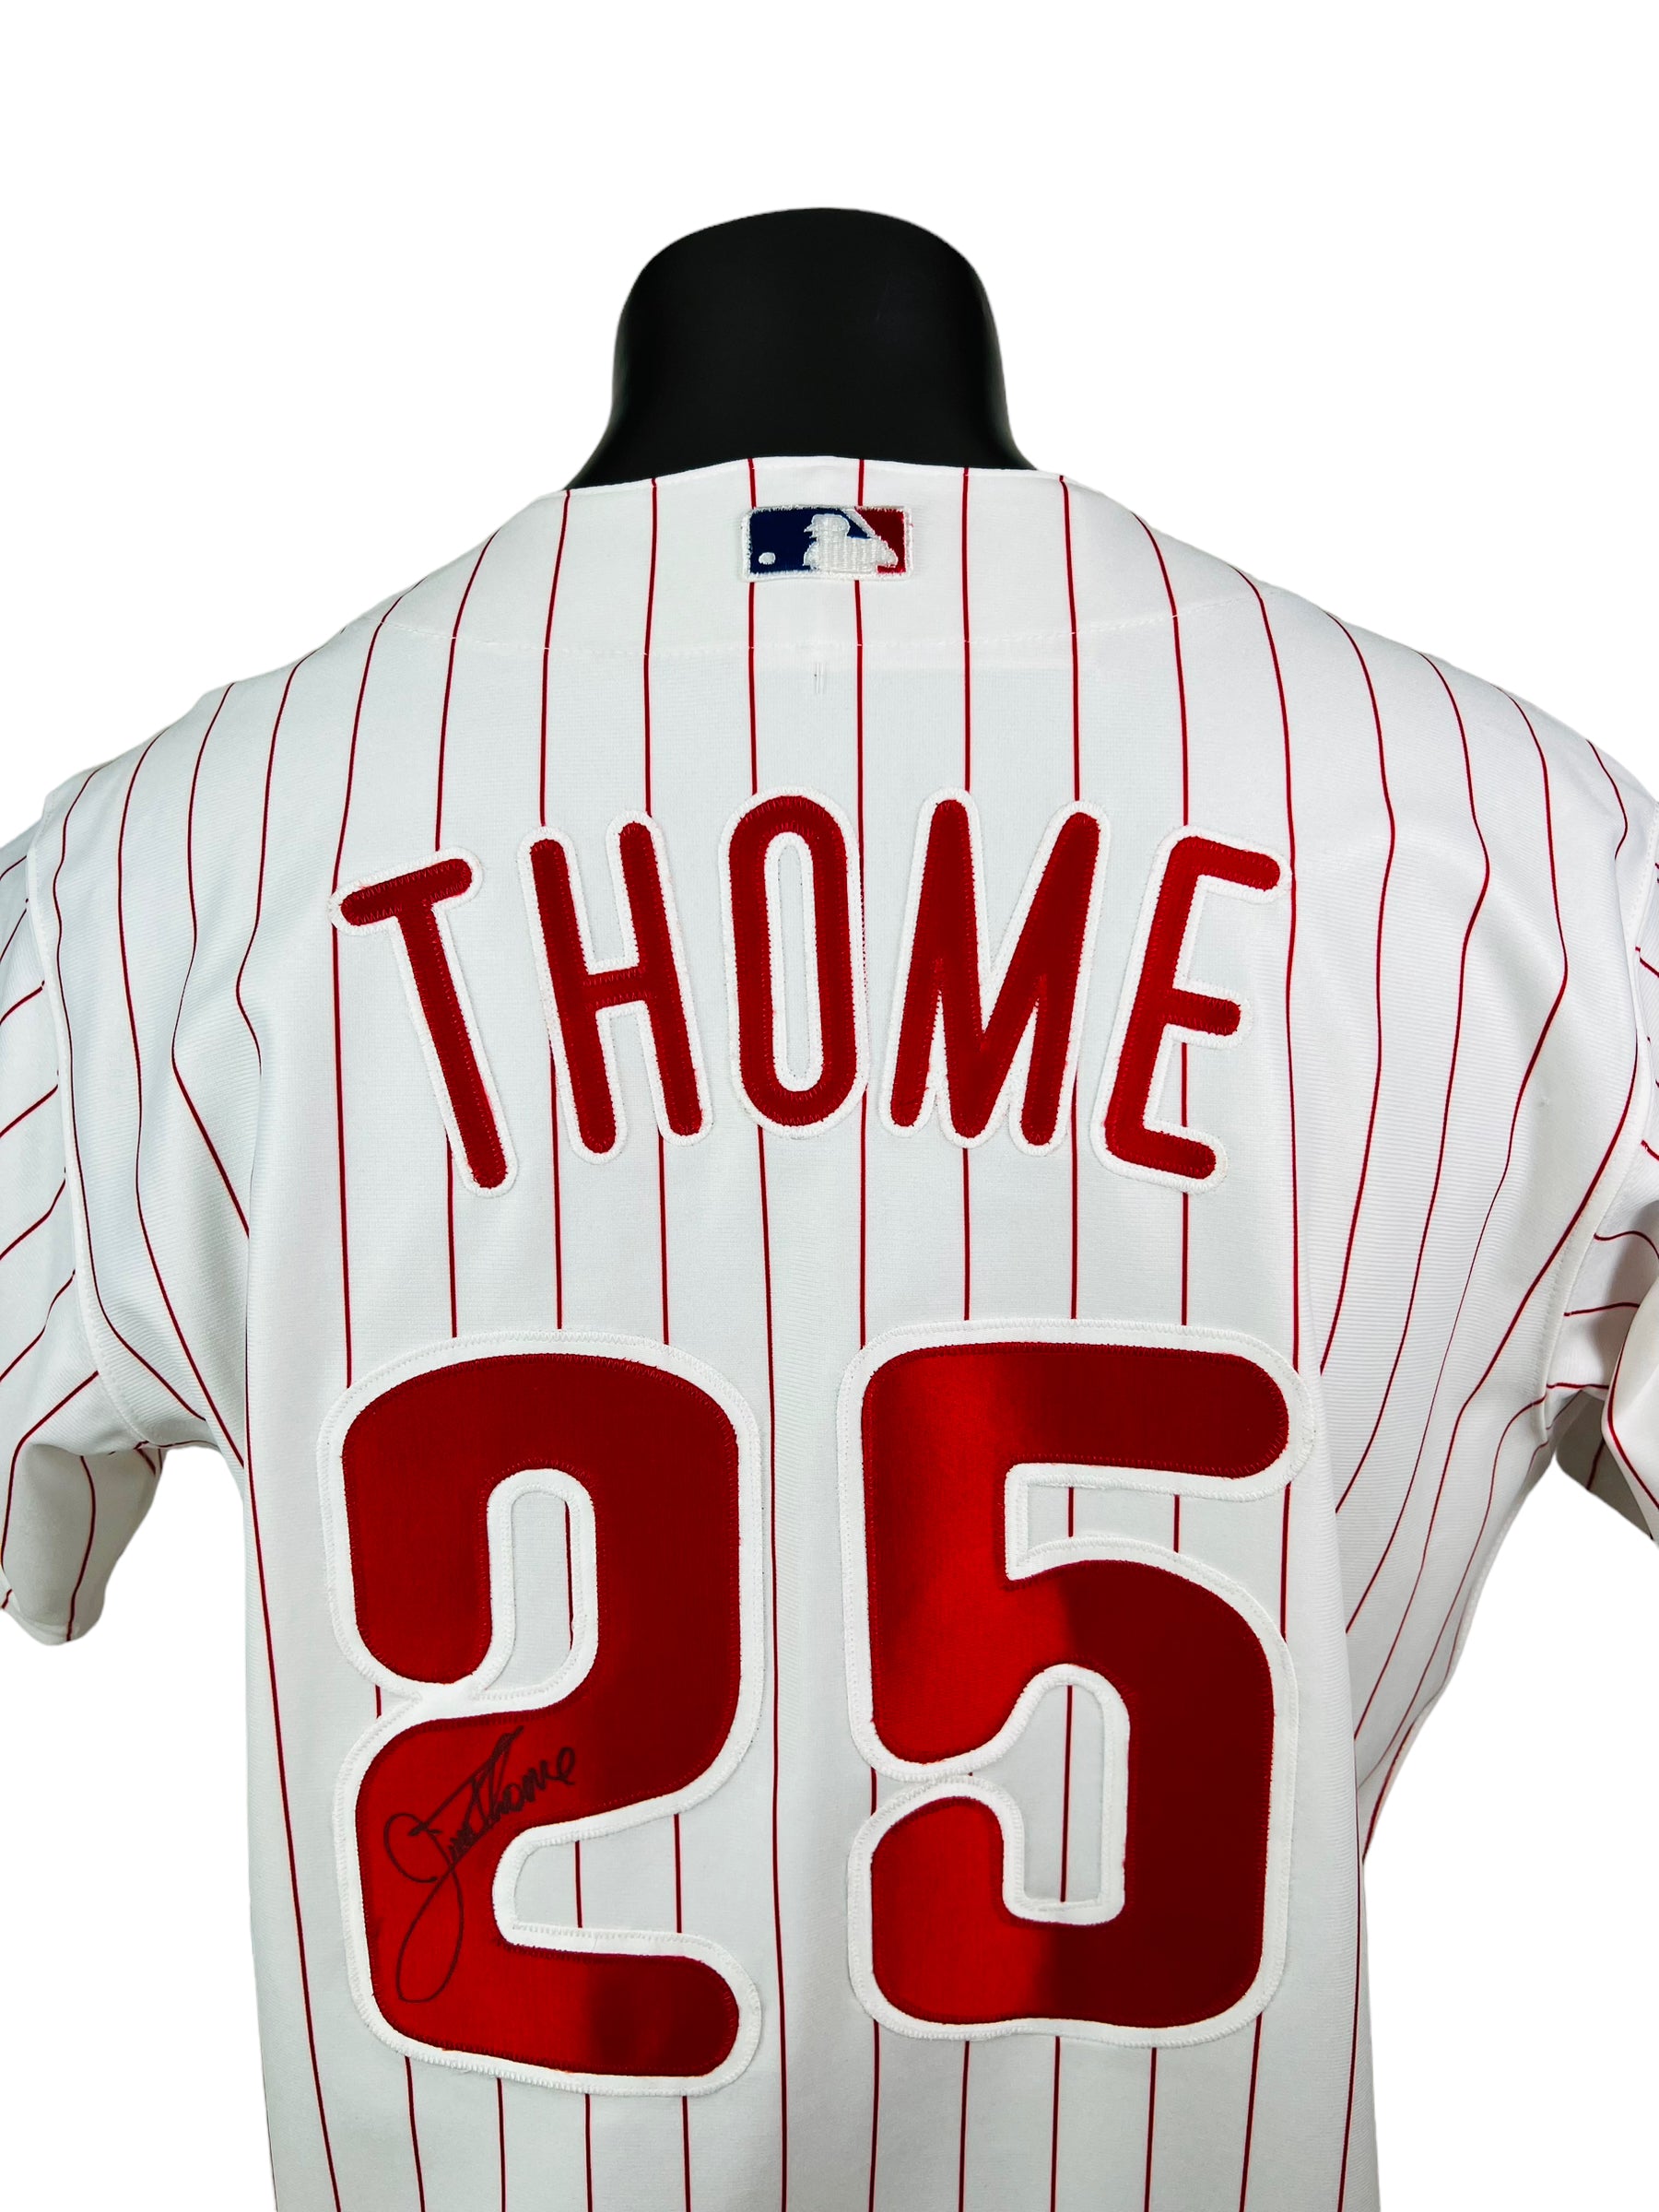 Jim Thome Autographed Jersey - Size 52